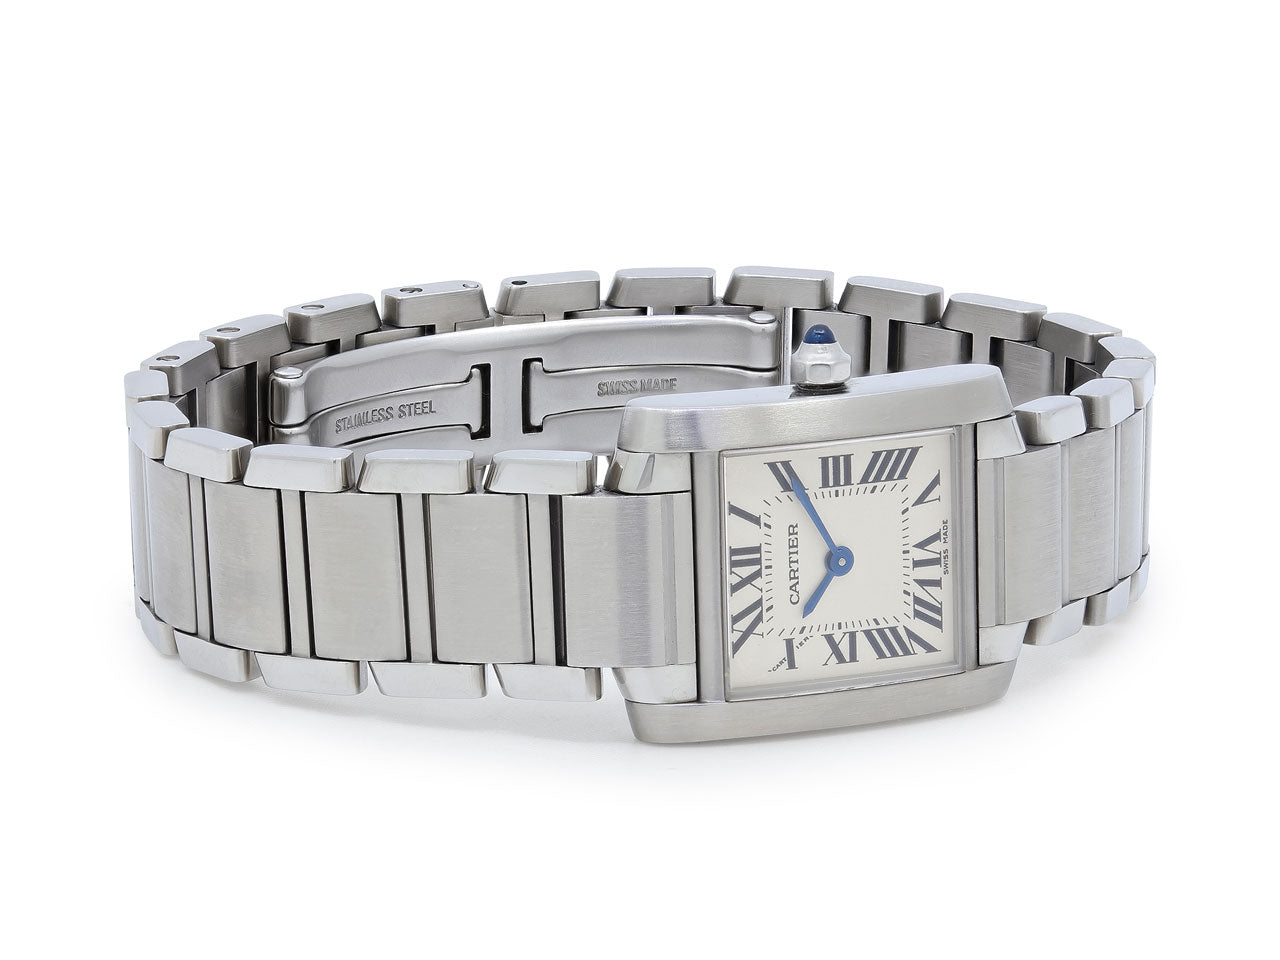 Cartier 'Tank Française' Watch in Stainless Steel